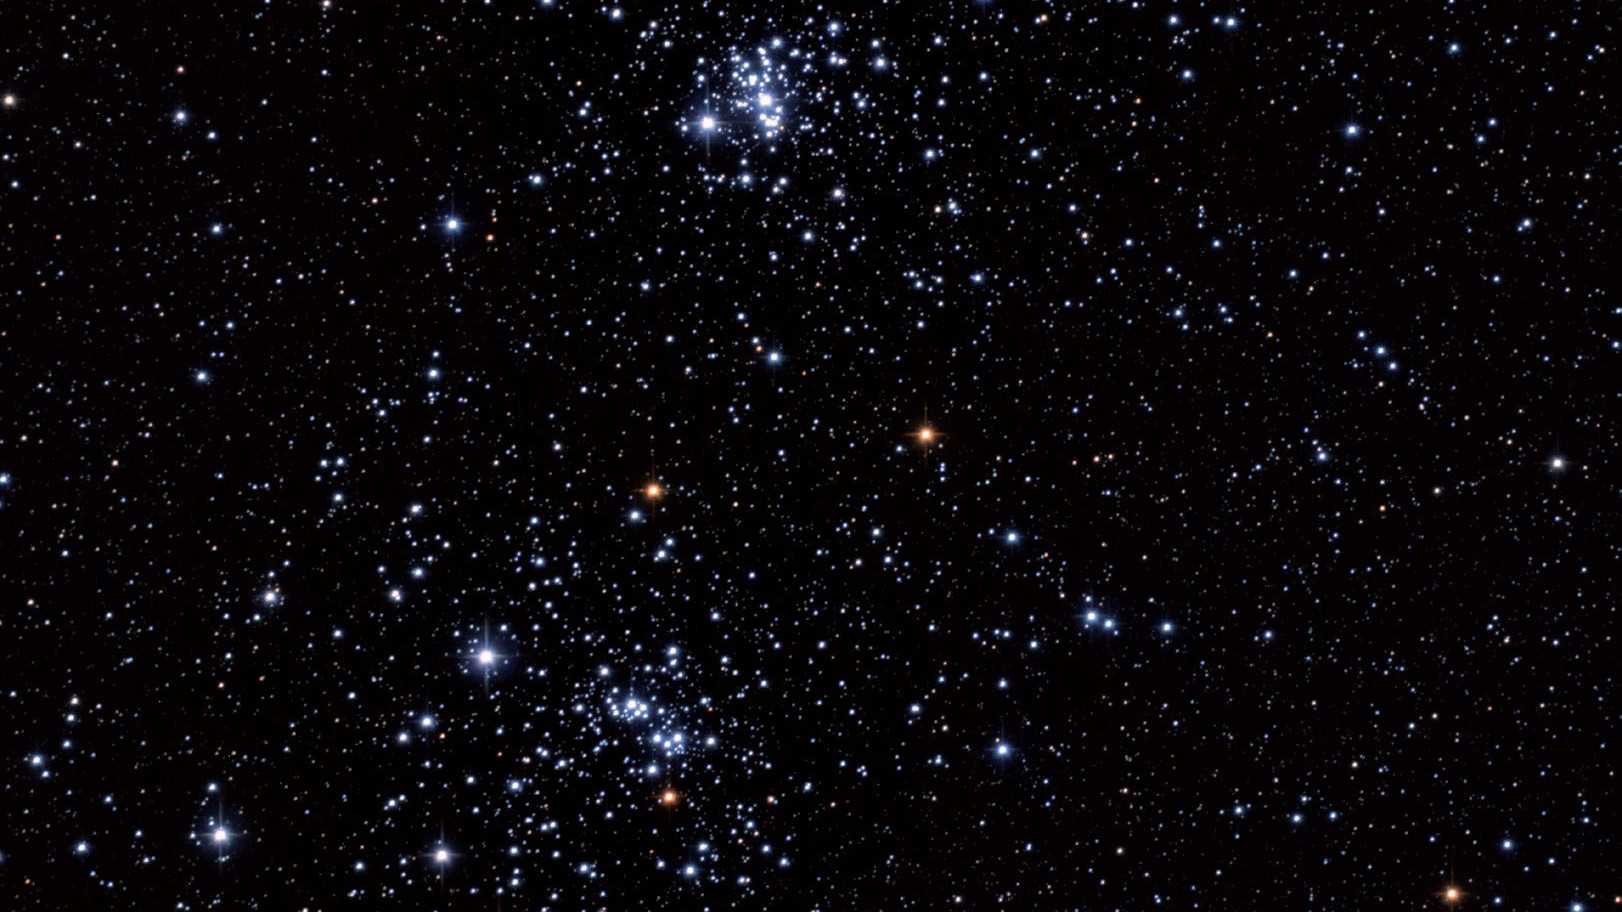 The pair of open clusters h and χ Persei, also known as NGC 869/884, is a great binoculars object thanks to its dimensions. Marcus Degenkolbe